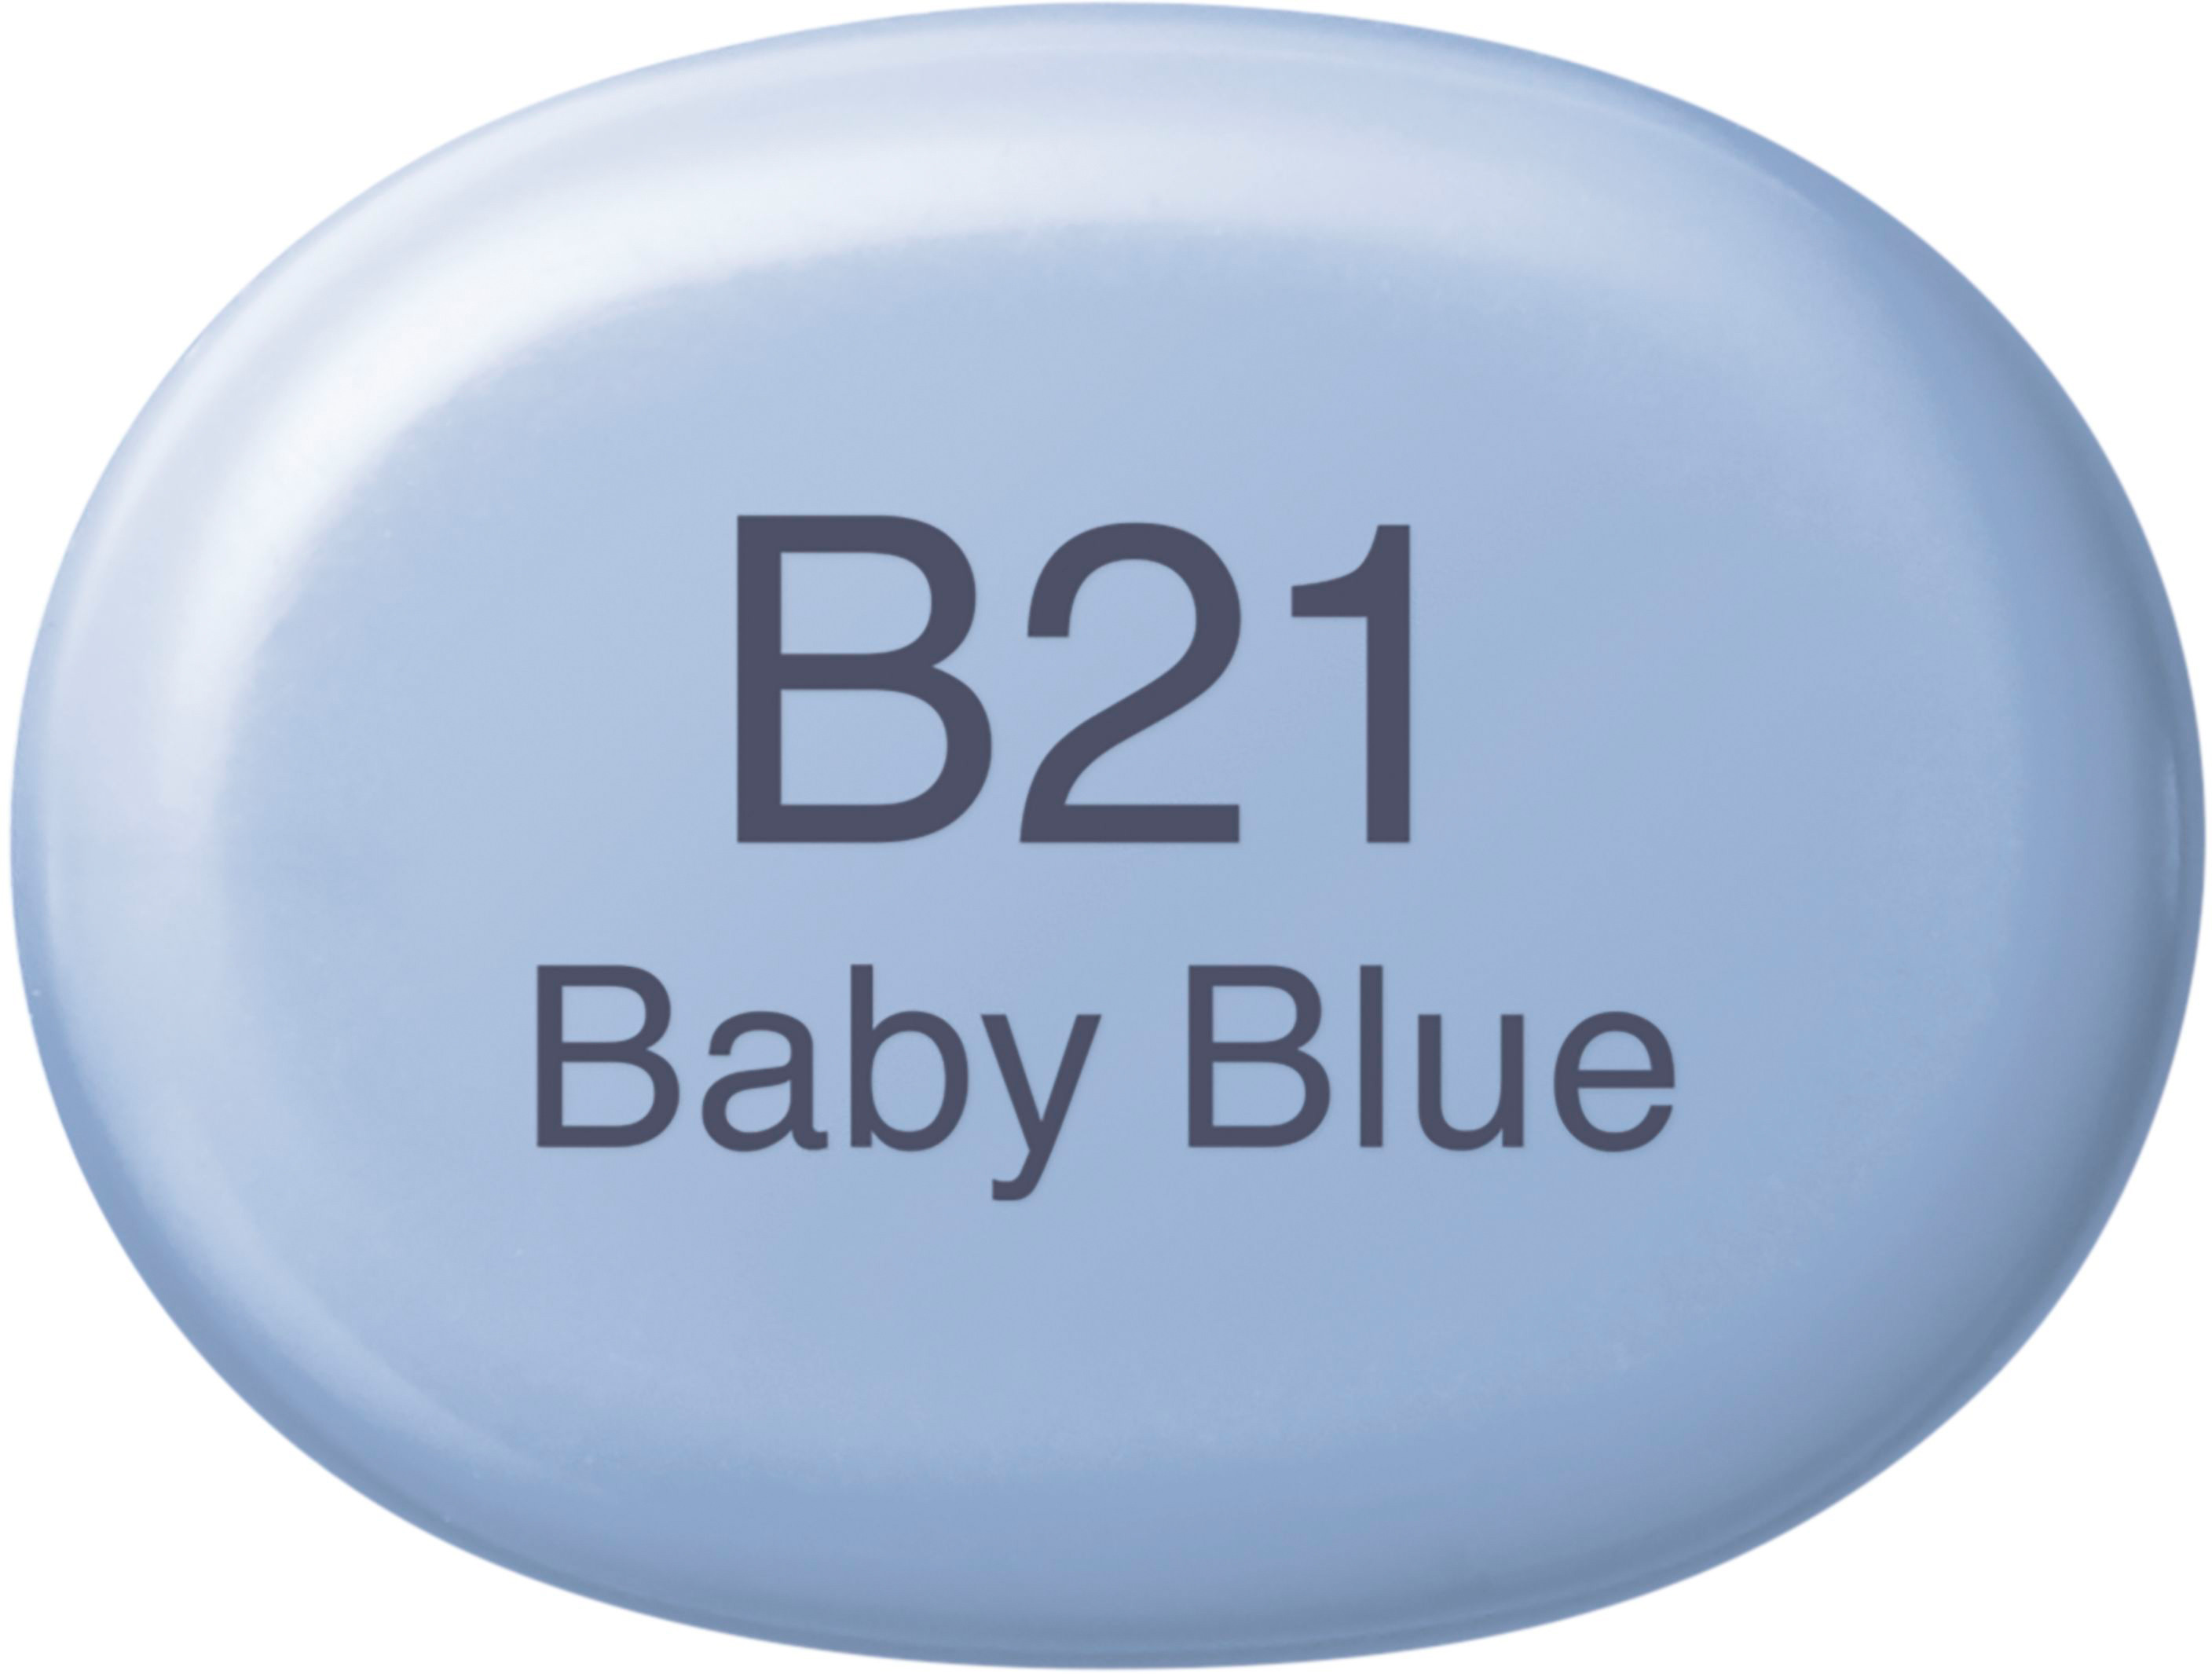 COPIC Marker Sketch 21075225 B21 - Baby Blue